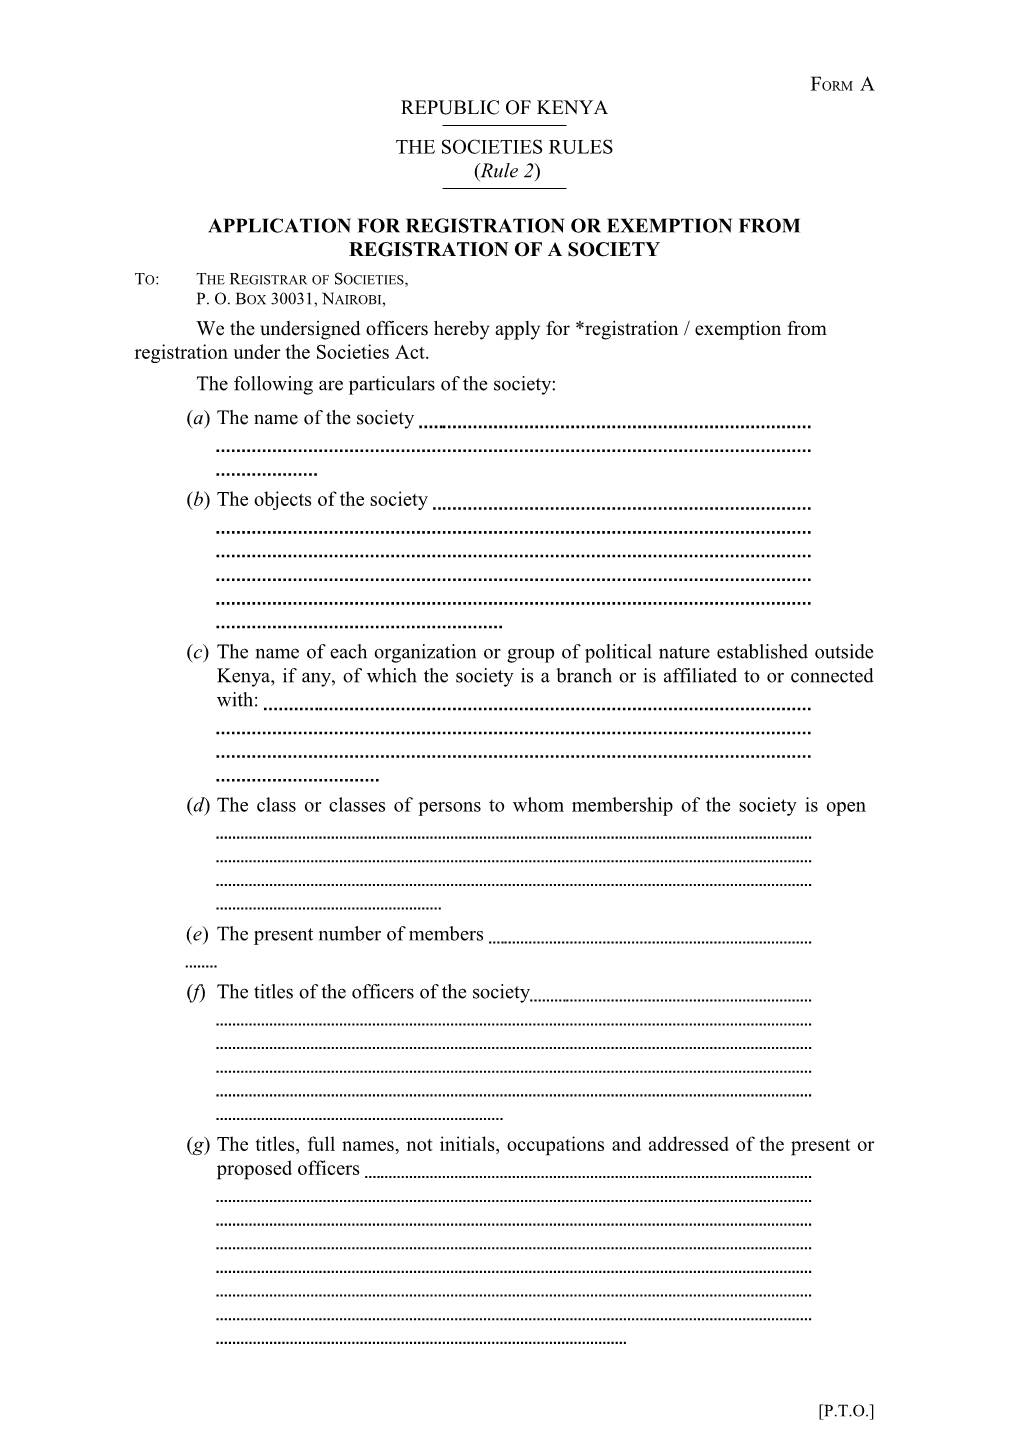 Application for Registration Or Exemption from Registration of a Society